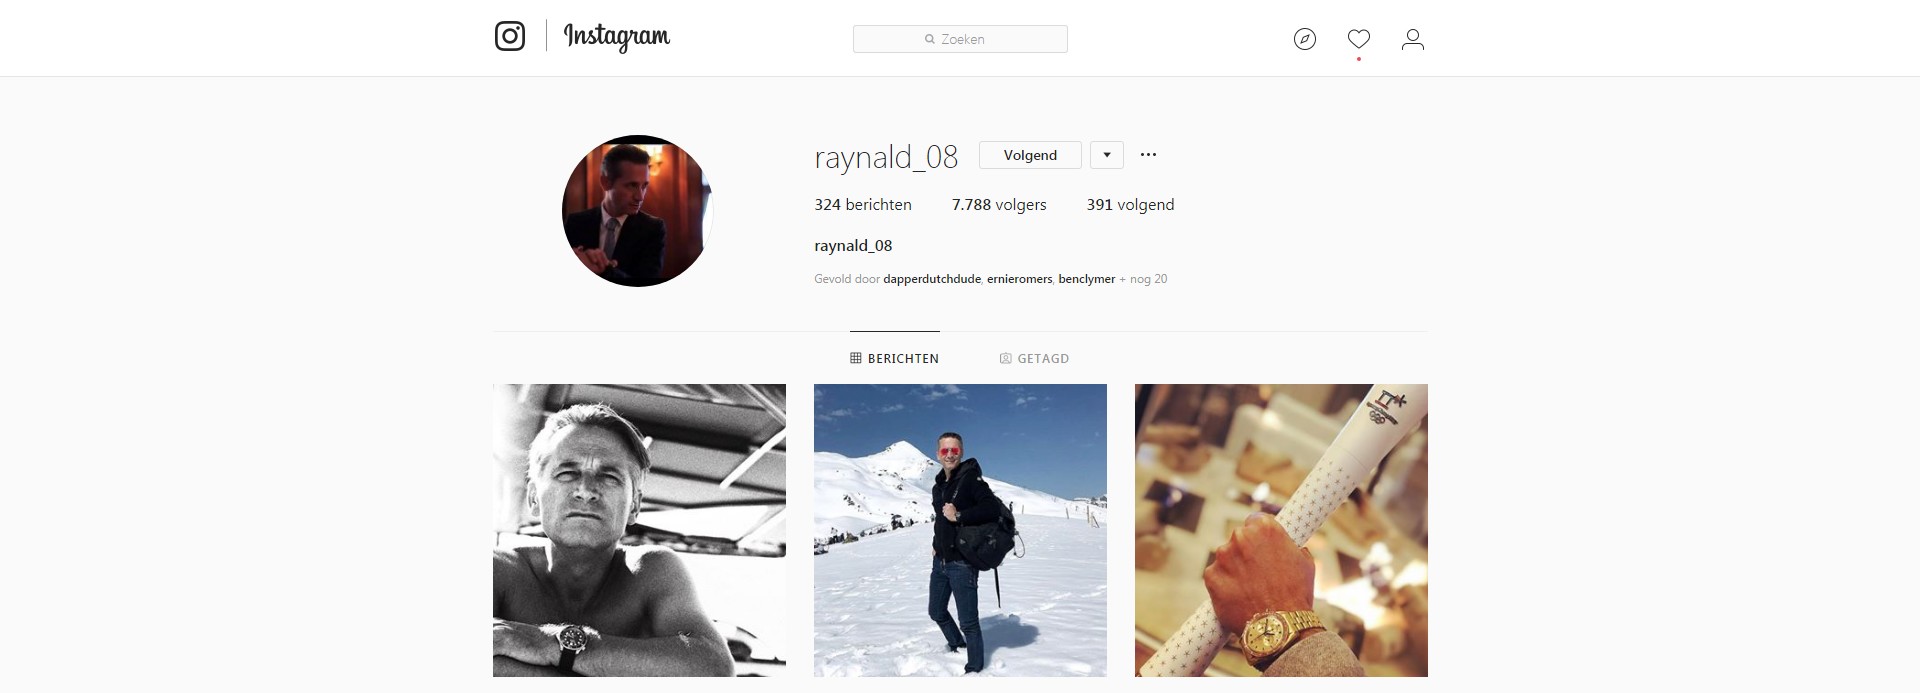 Instagram swiss watch brand CEO The Ace List - who to follow